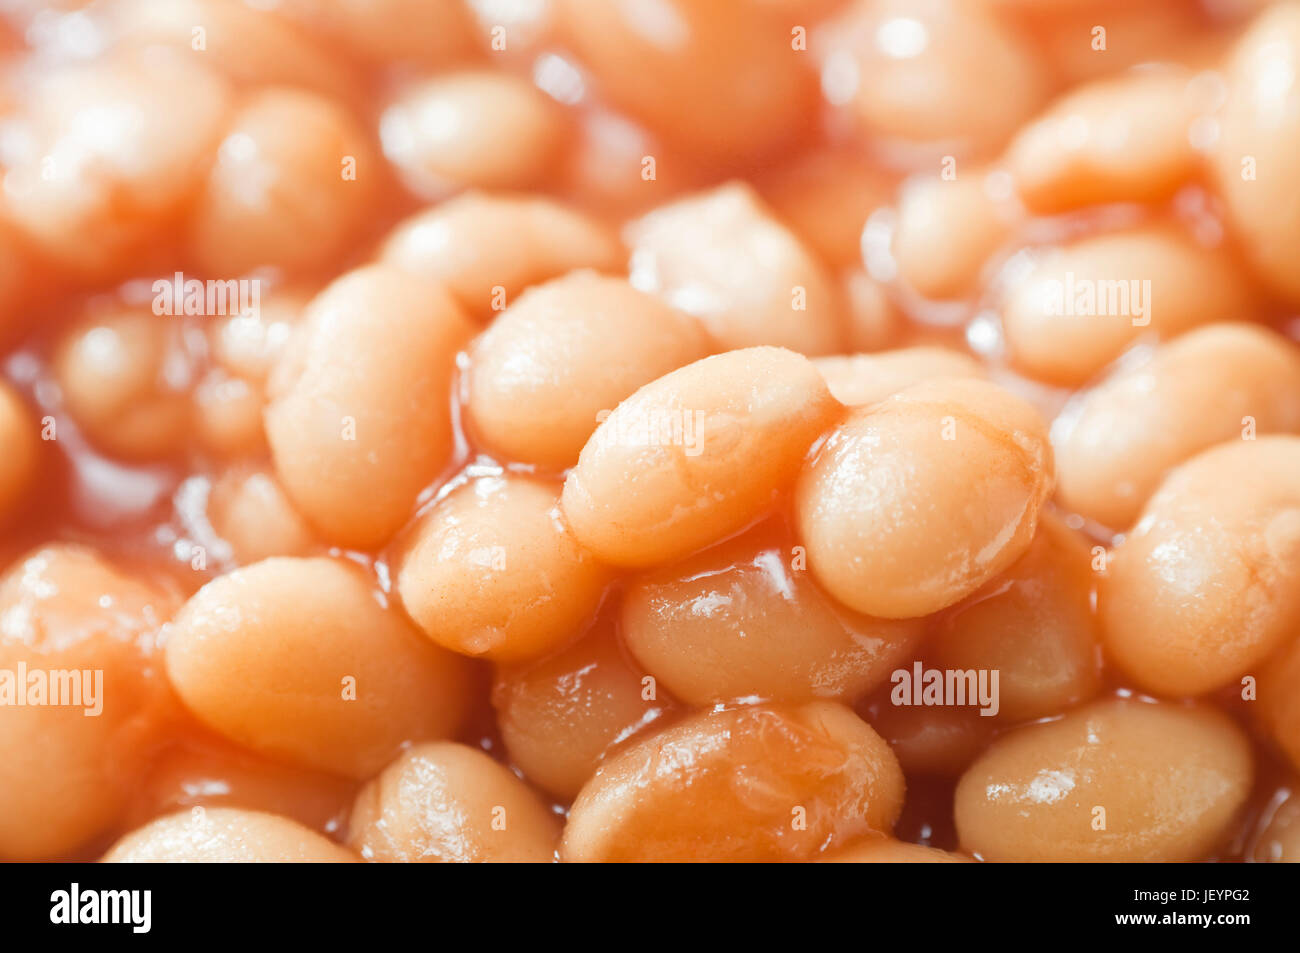 Cooked baked beans with tomato sauce in close-up.  Filling whole frame. Stock Photo